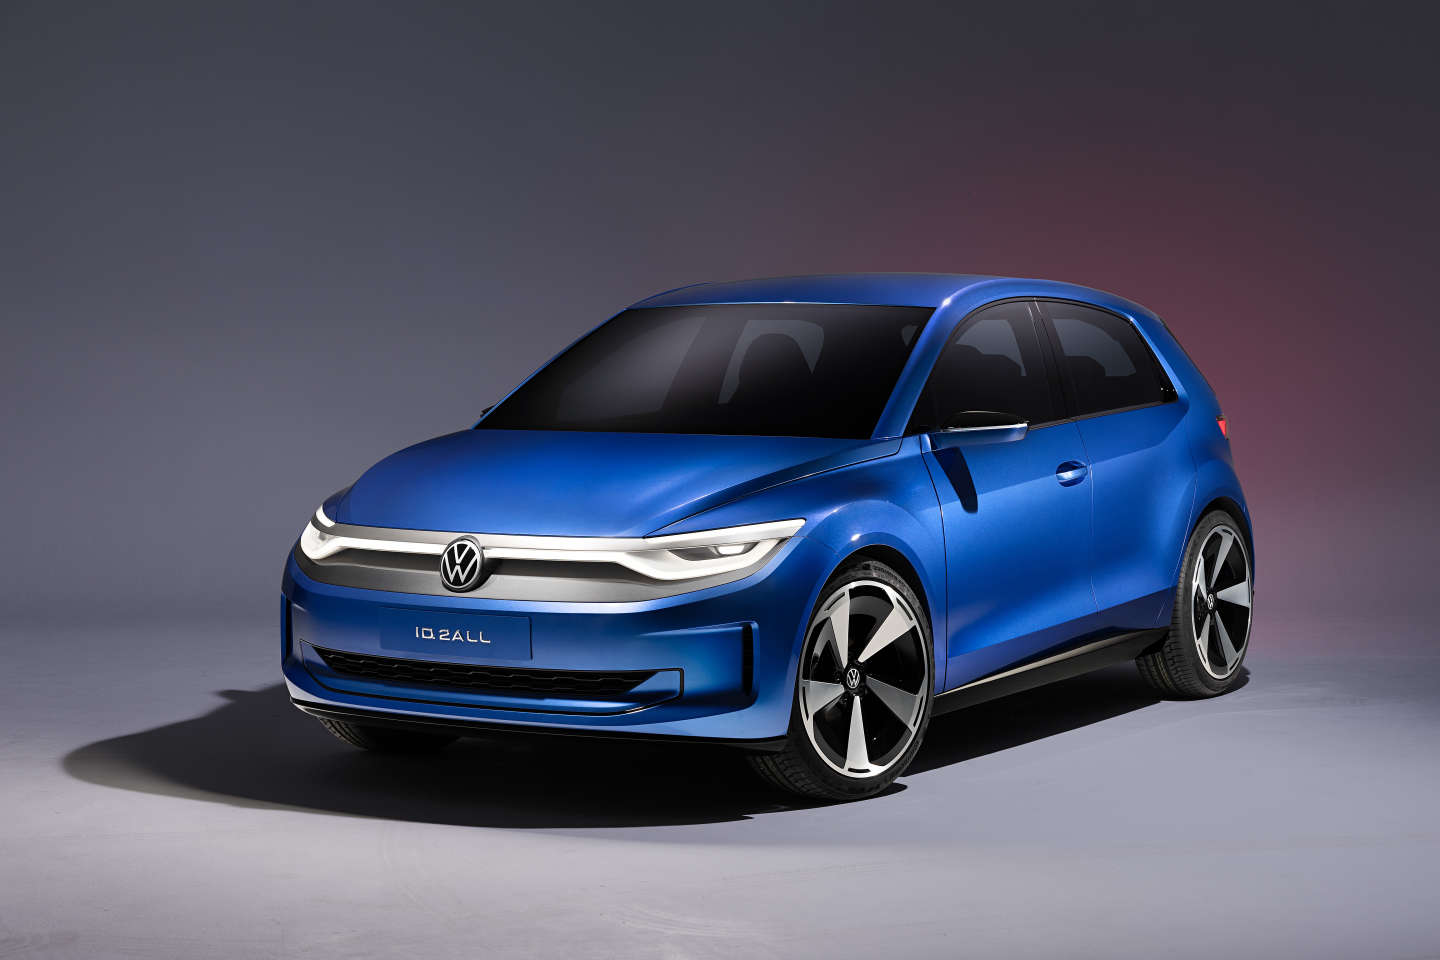 At Volkswagen, electric cars for less than 25,000 euros, and even less than 20,000 euros